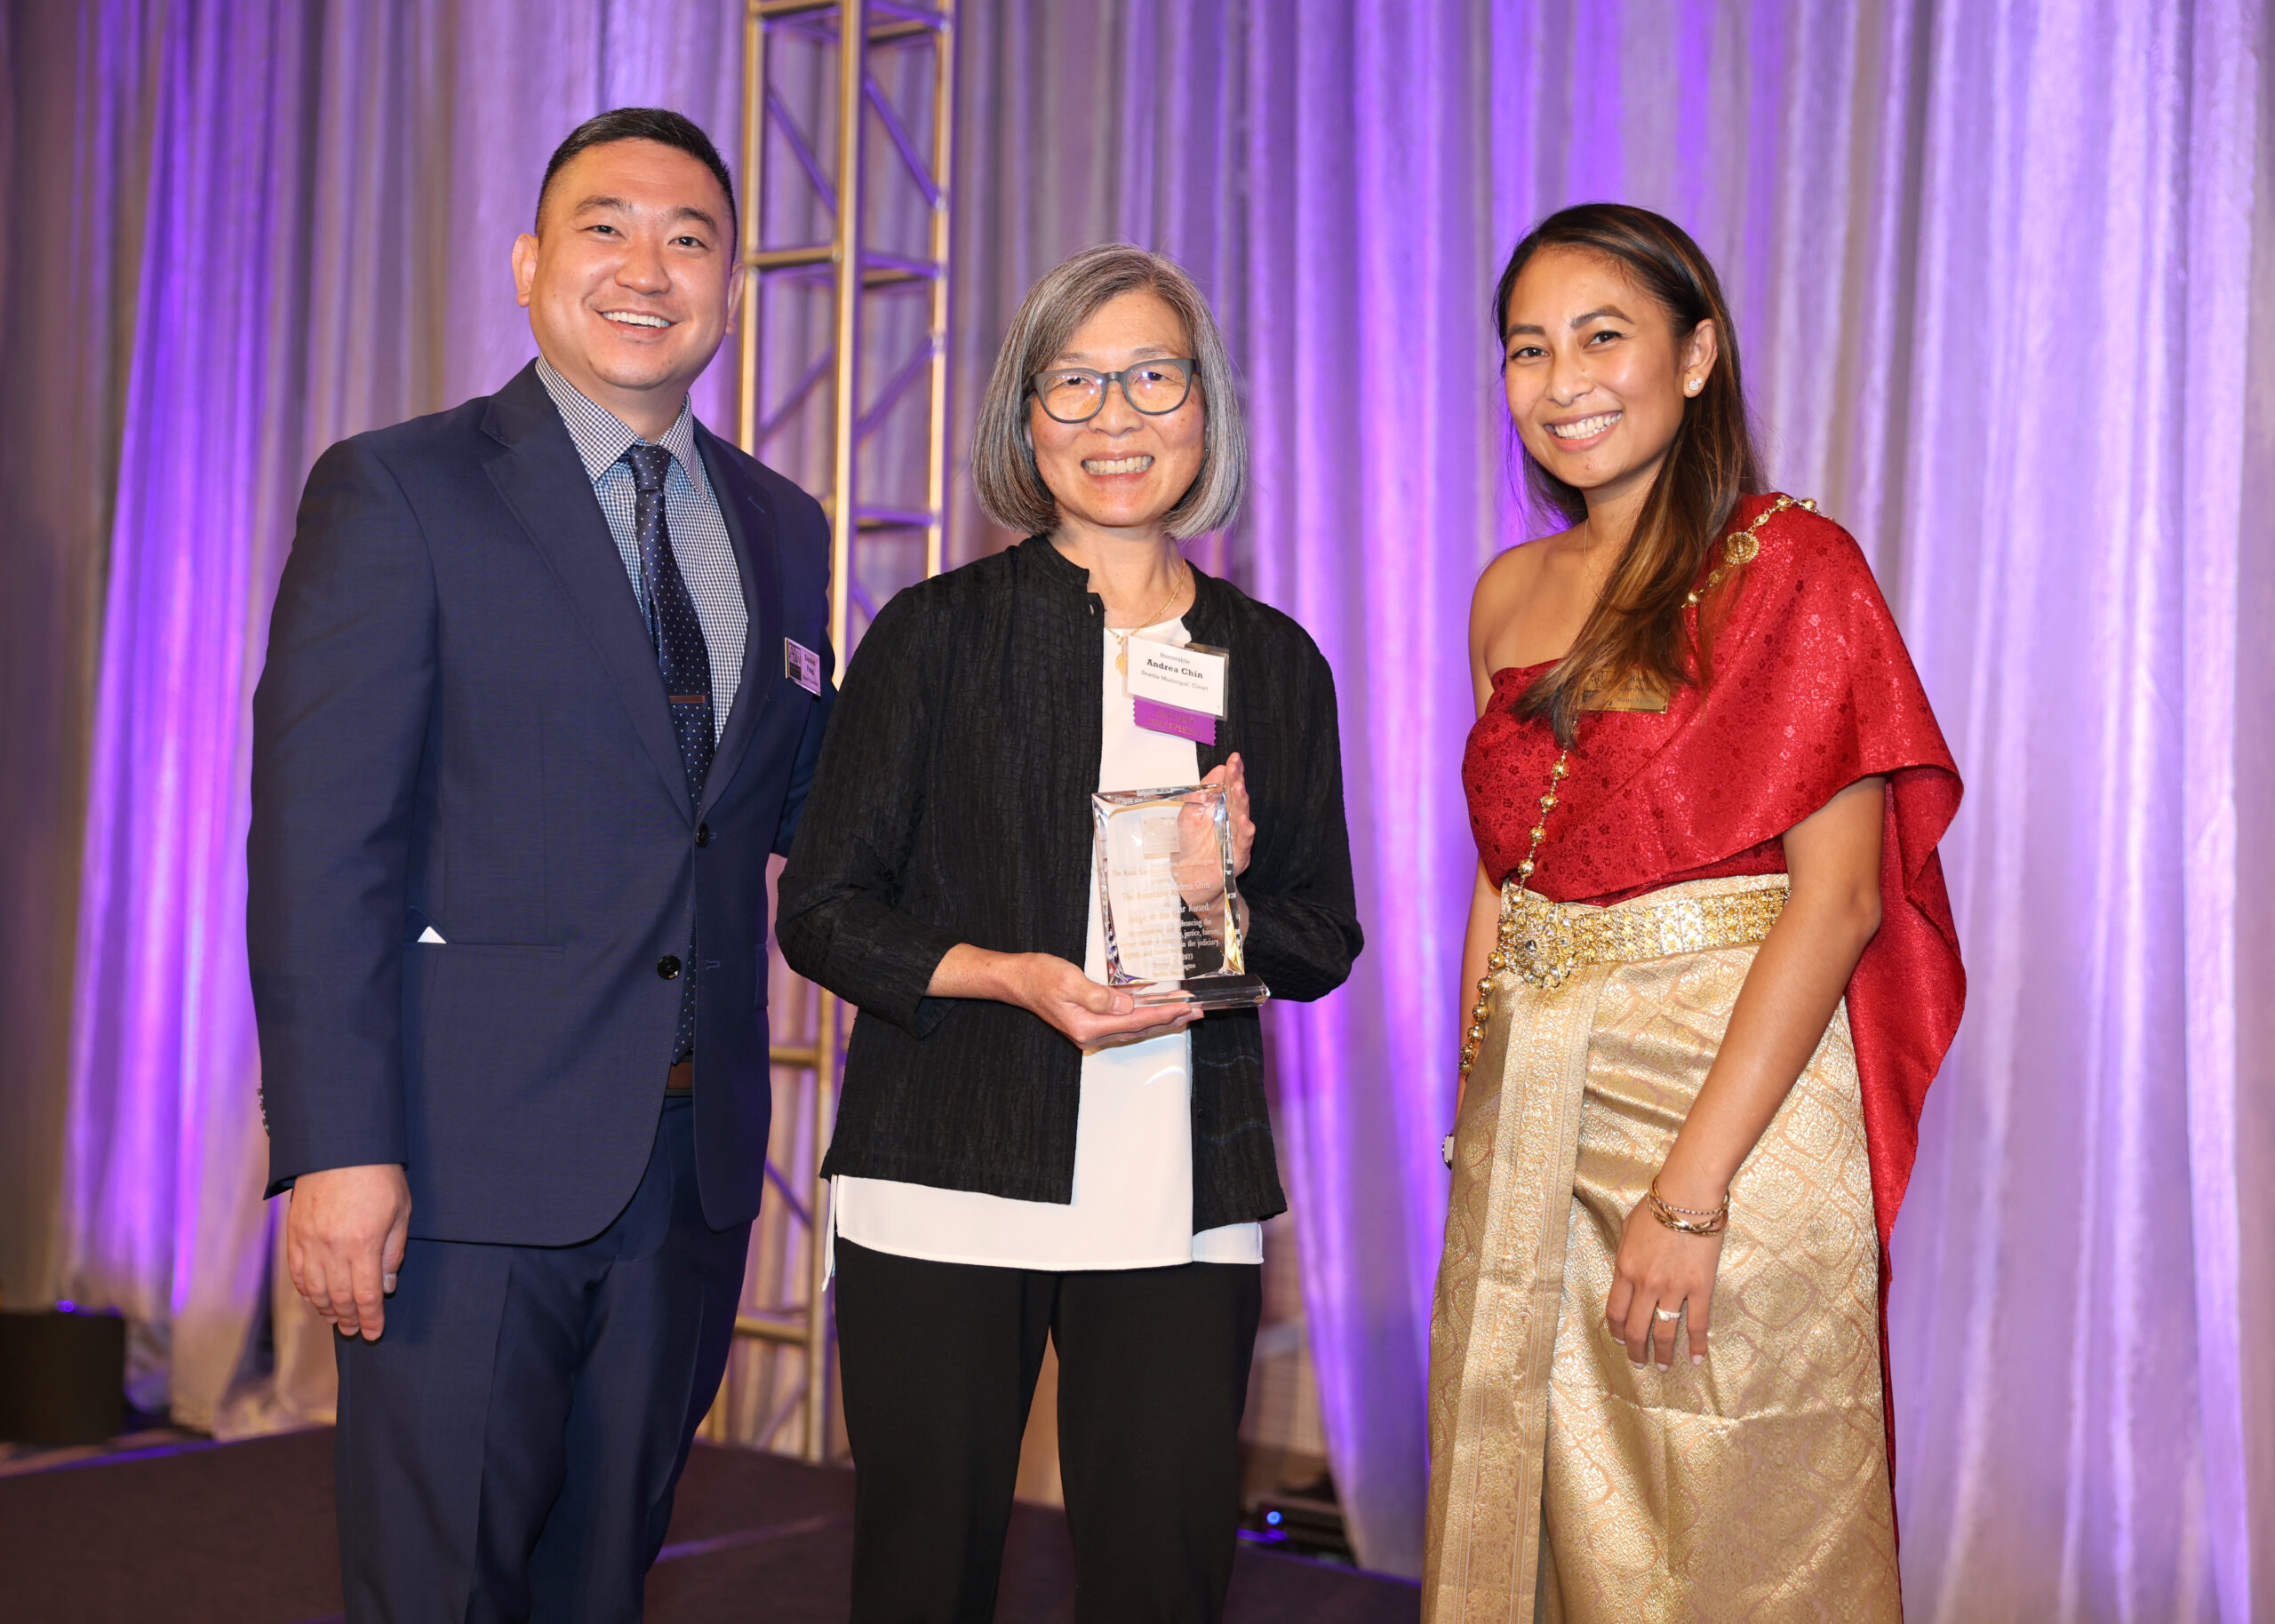 ABAW Judge of the year award presented to Hon. Andrea Chin